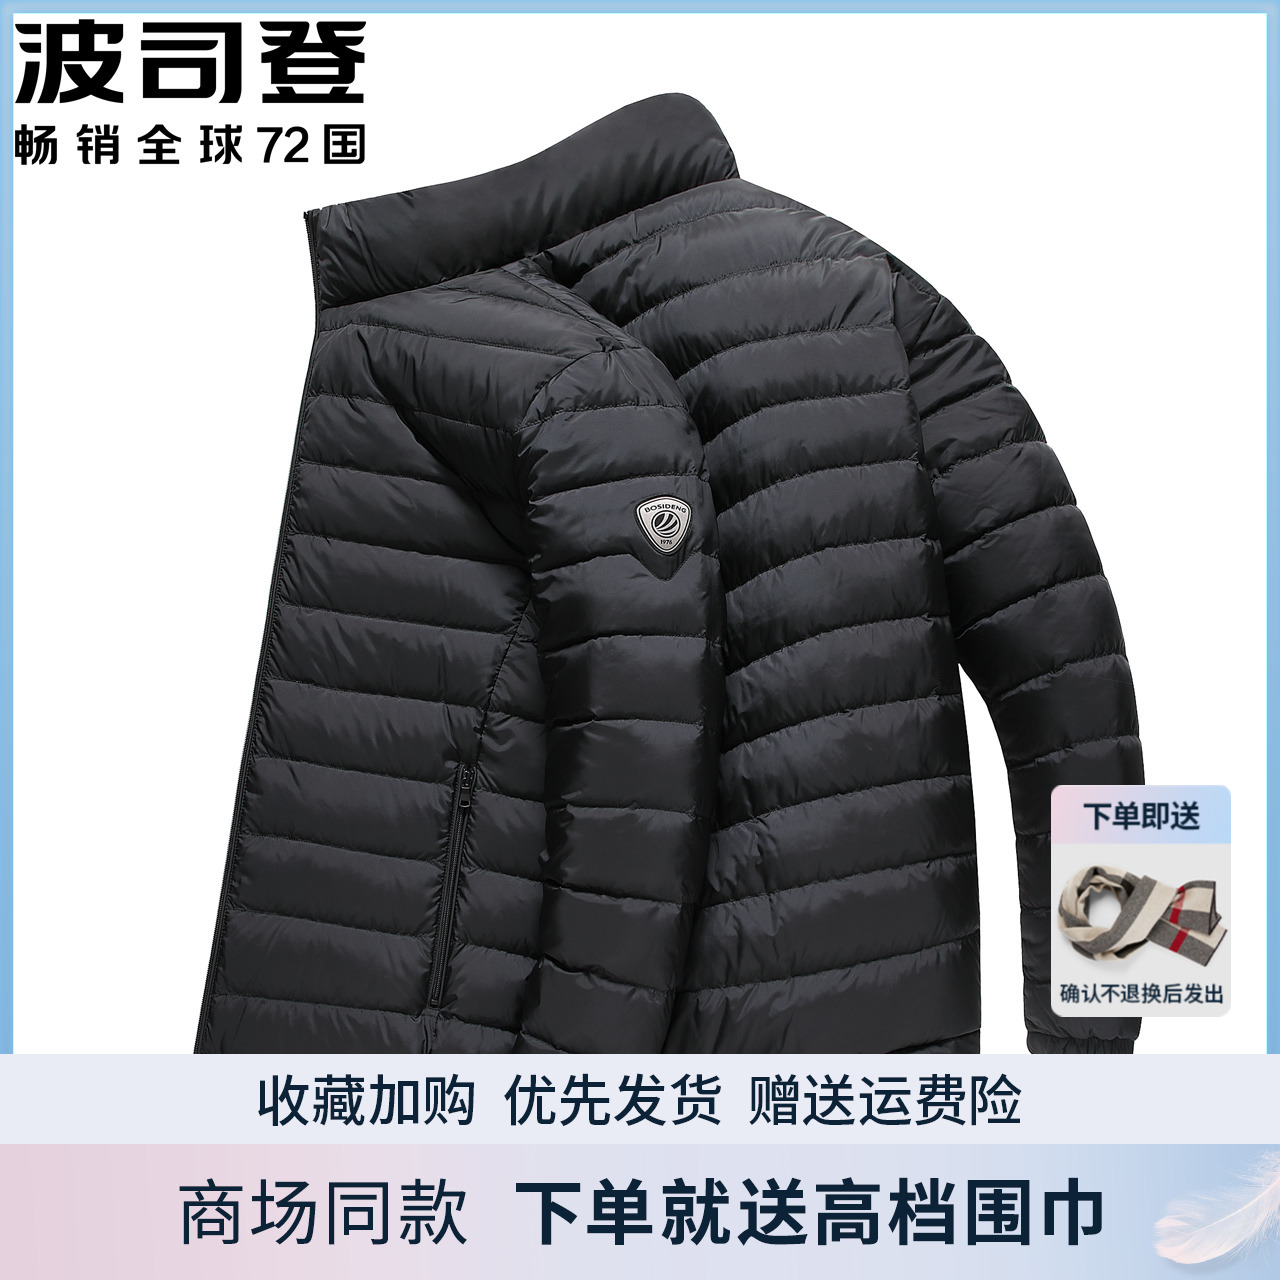 Bourgendon light and thin down clothes Men's short section 2022 New Collar Fashion Casual Warm Autumn winter Anti-season jacket